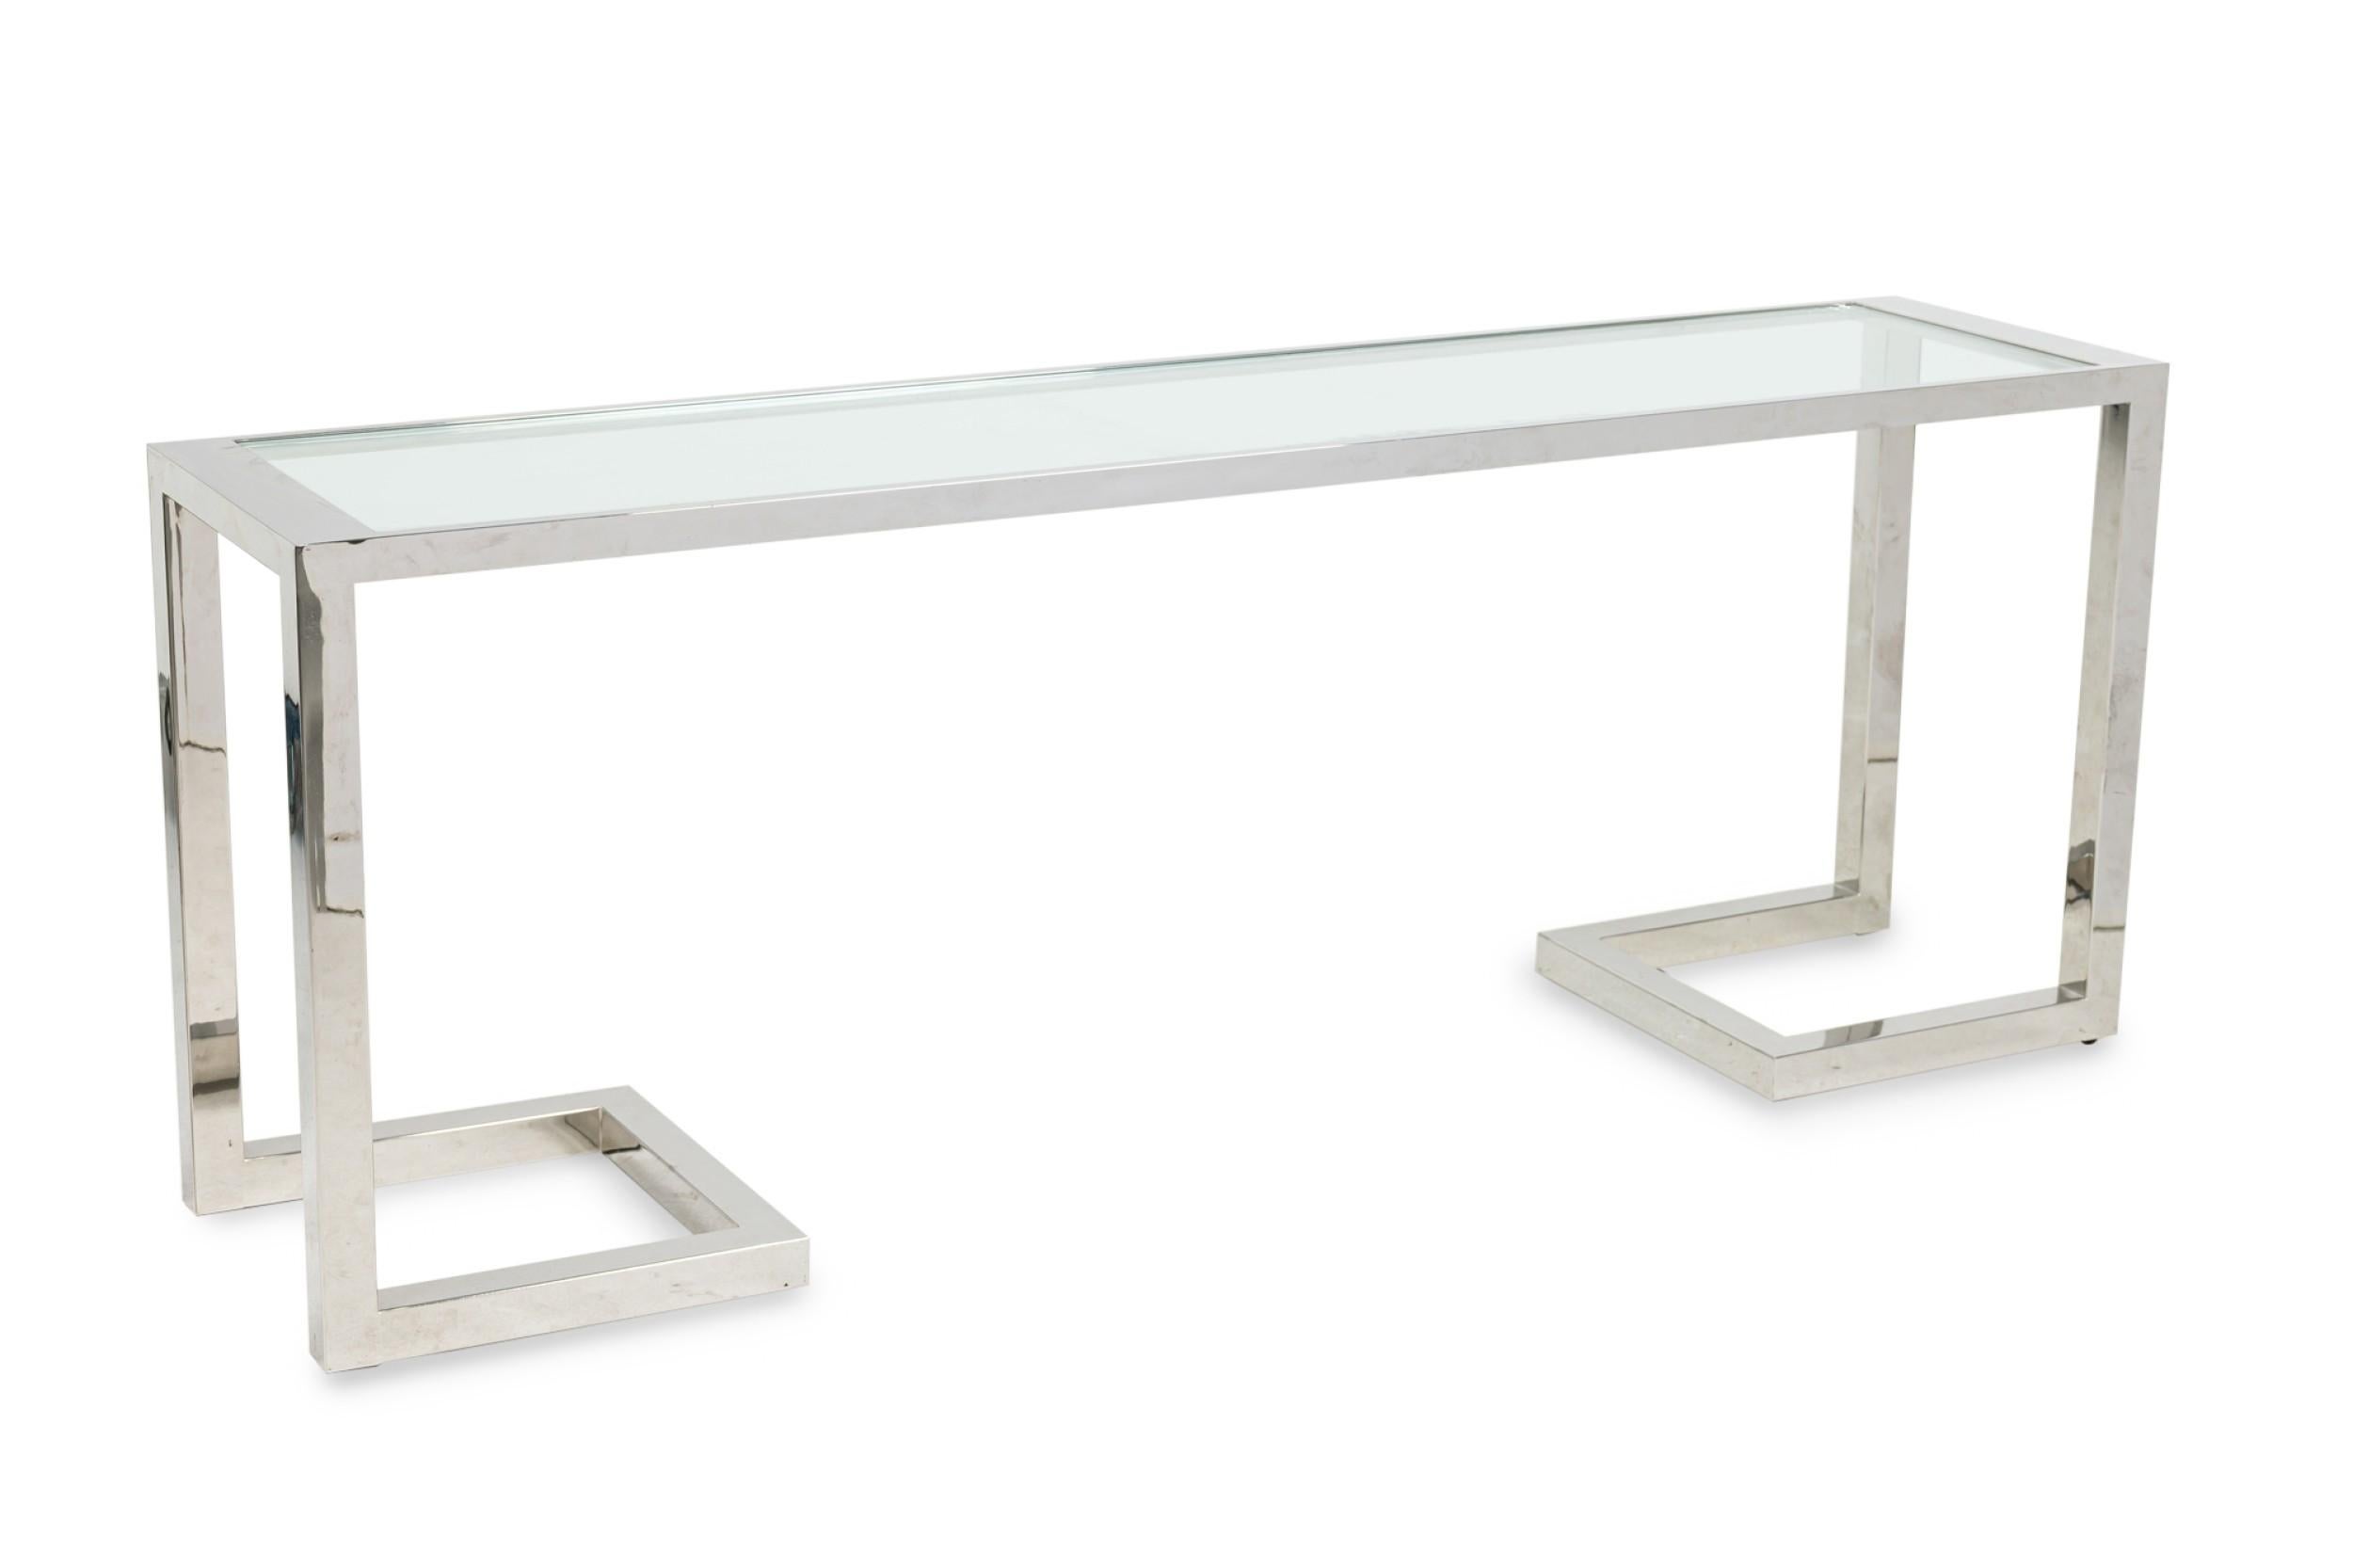 North American Milo Baughman American Modern Polished Chrome and Glass Bracket Console Table For Sale